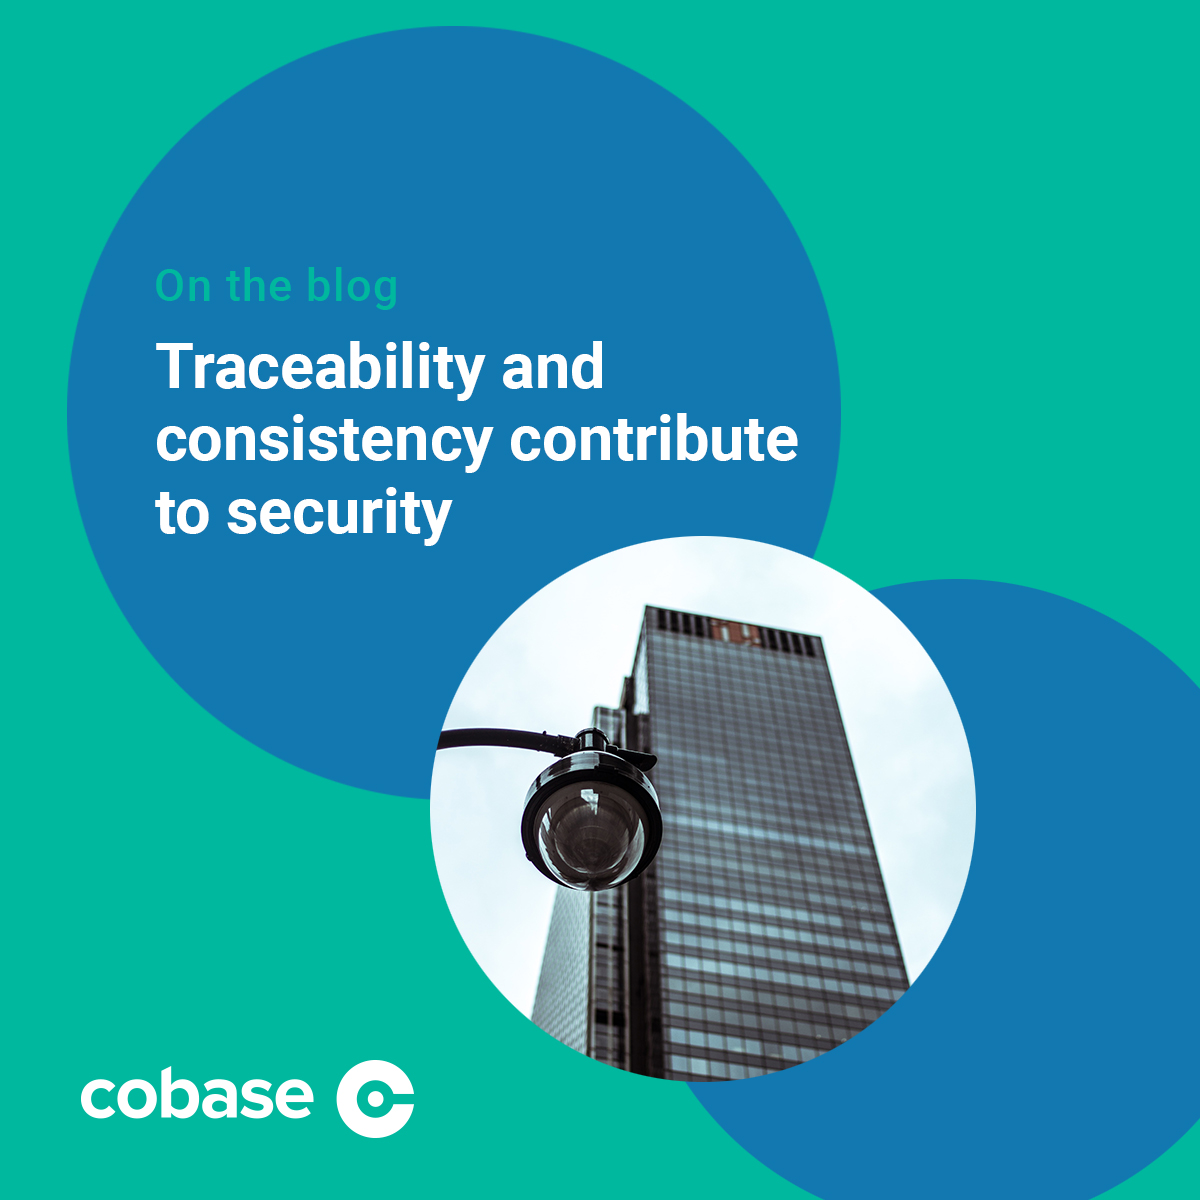 Traceability and consistency contribute to security